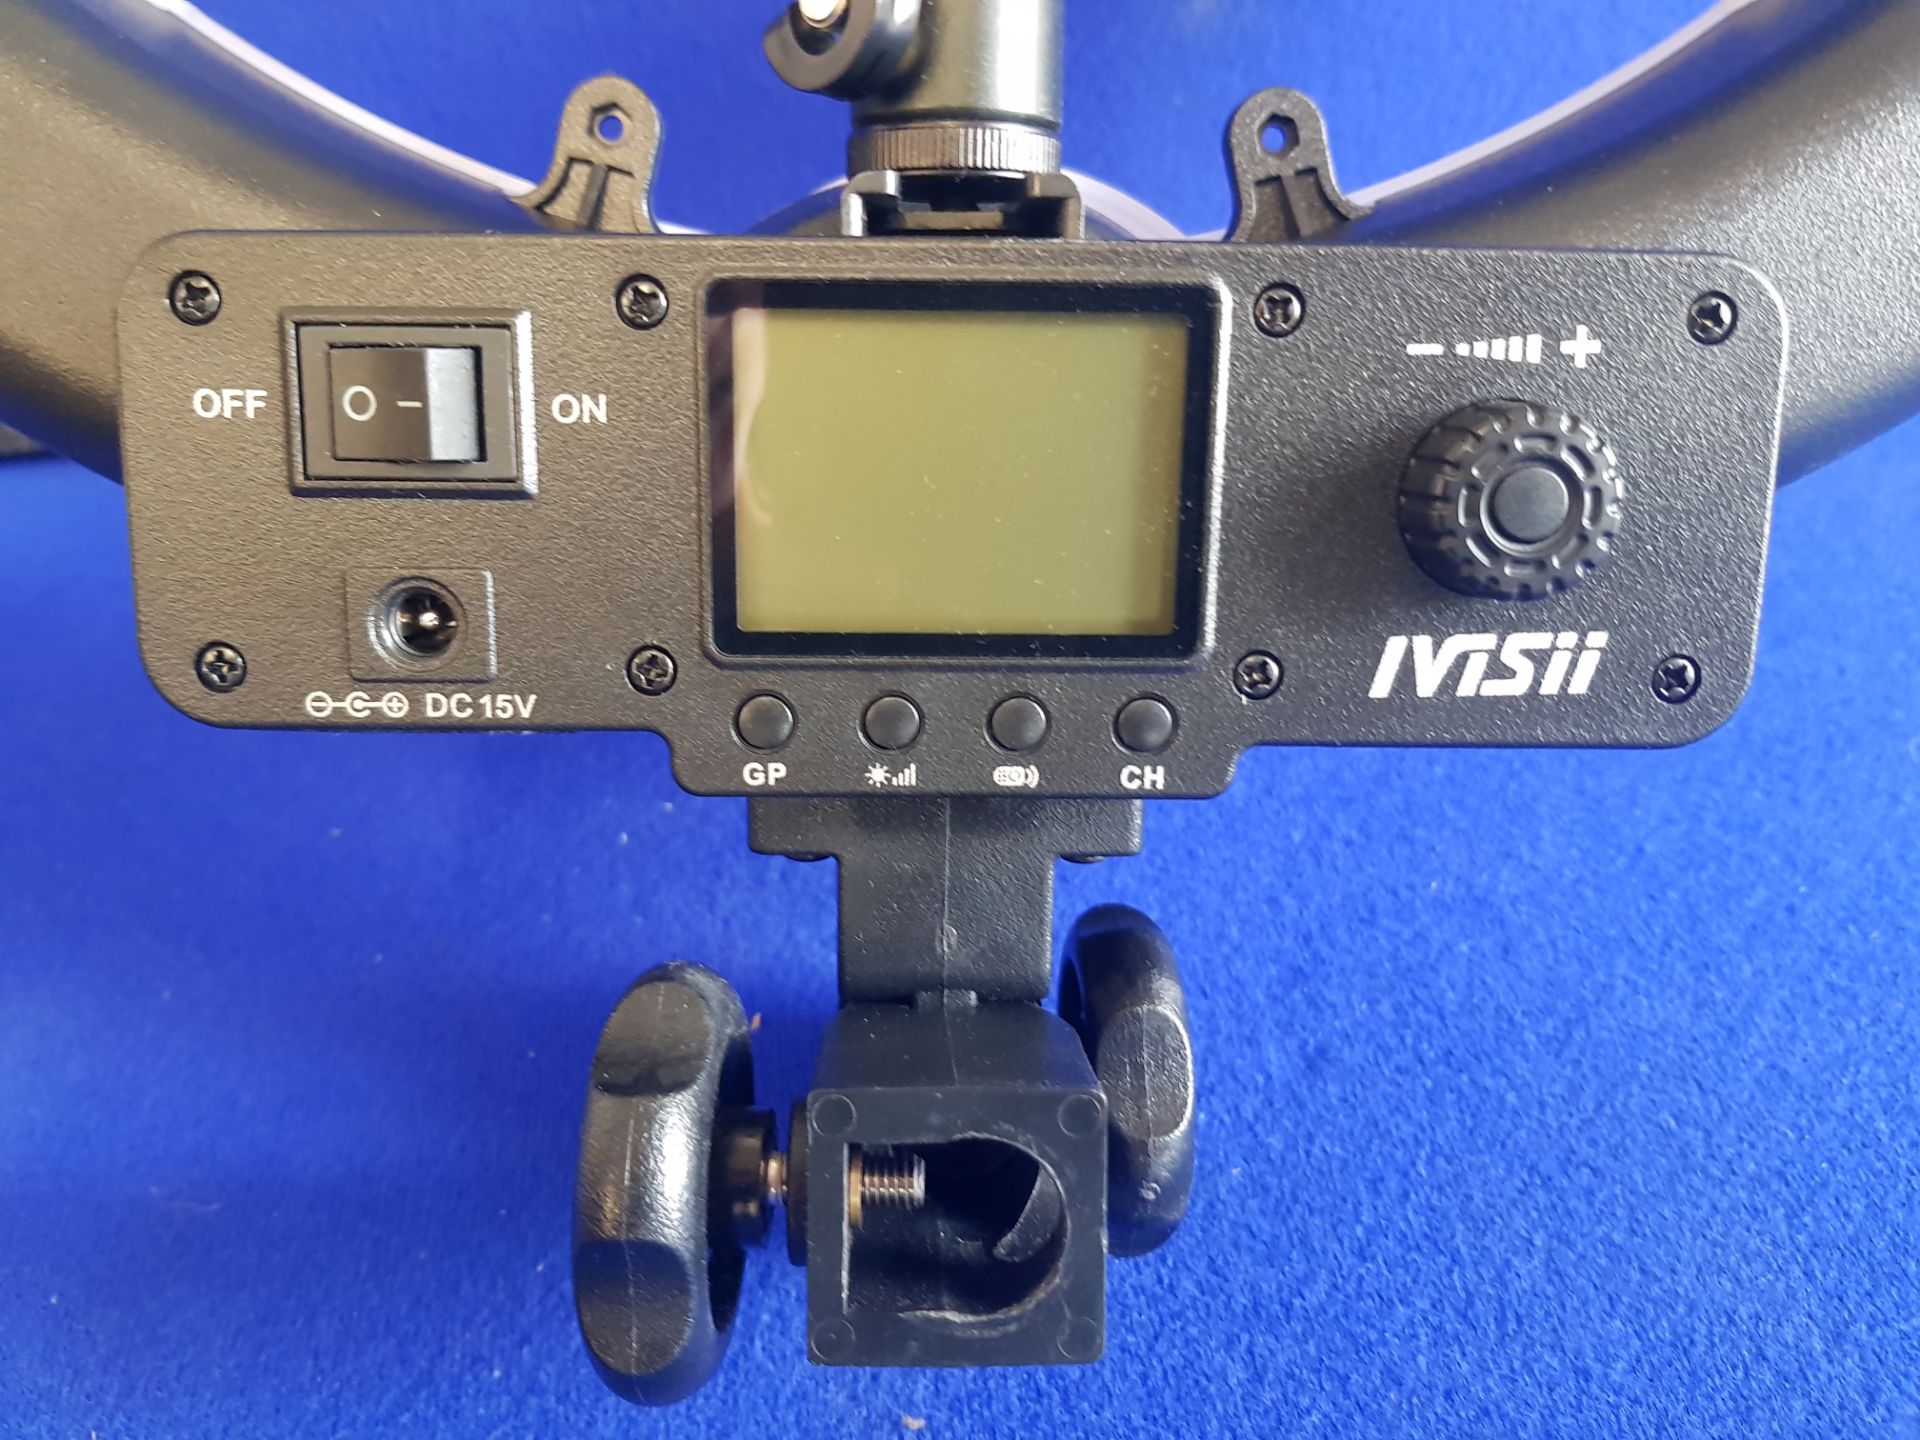 Ivisii Media Light With Adjustable Camera/Phone Stand - Image 3 of 7